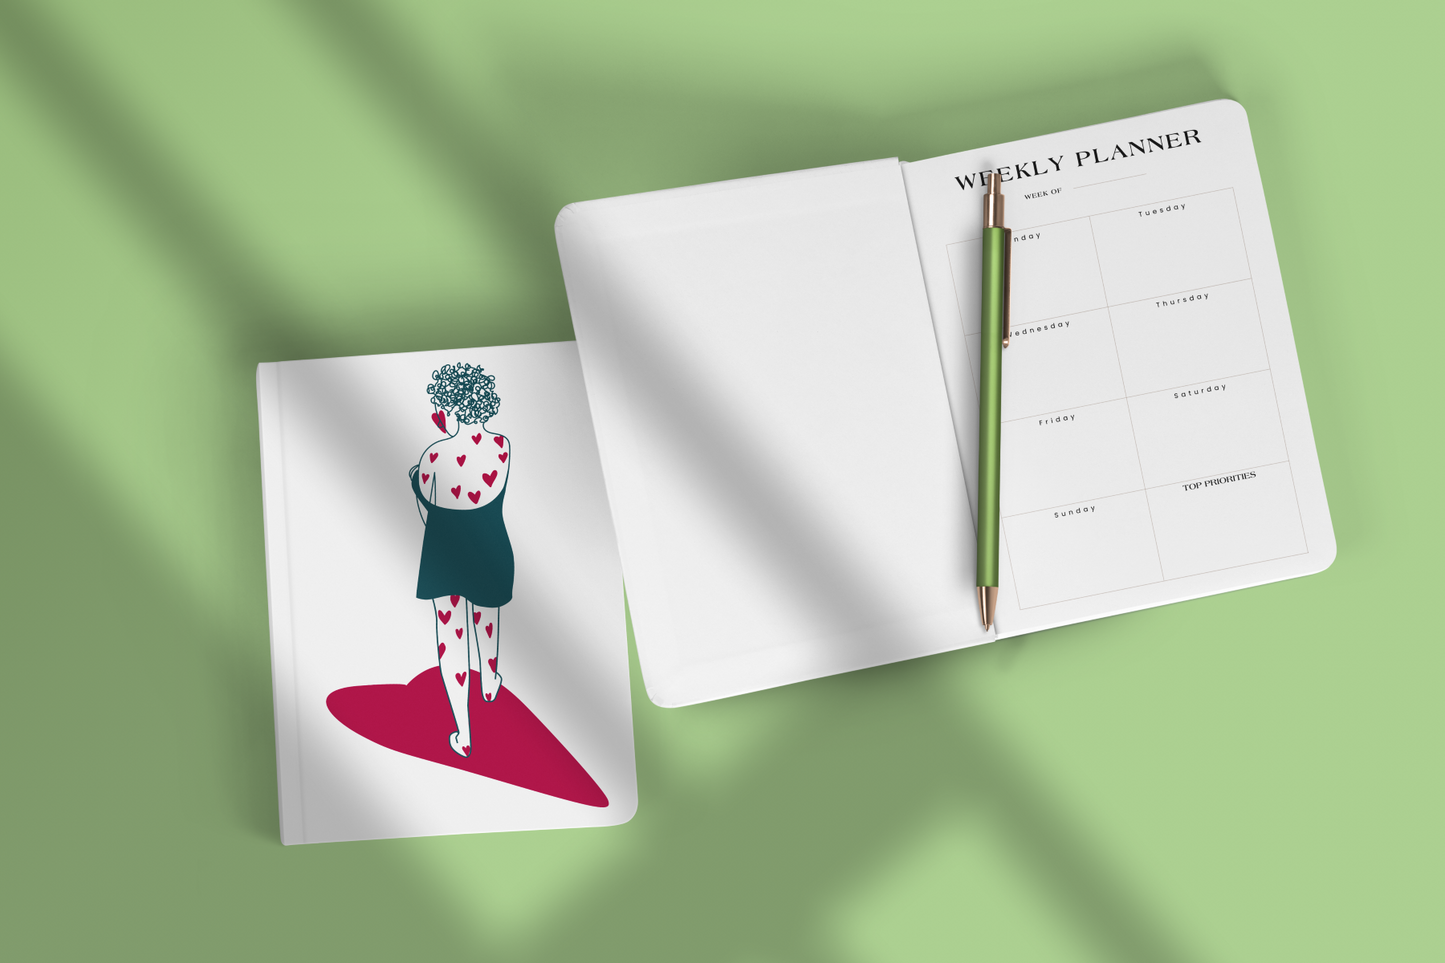 Planner/Journal - PRE ORDER YOURS